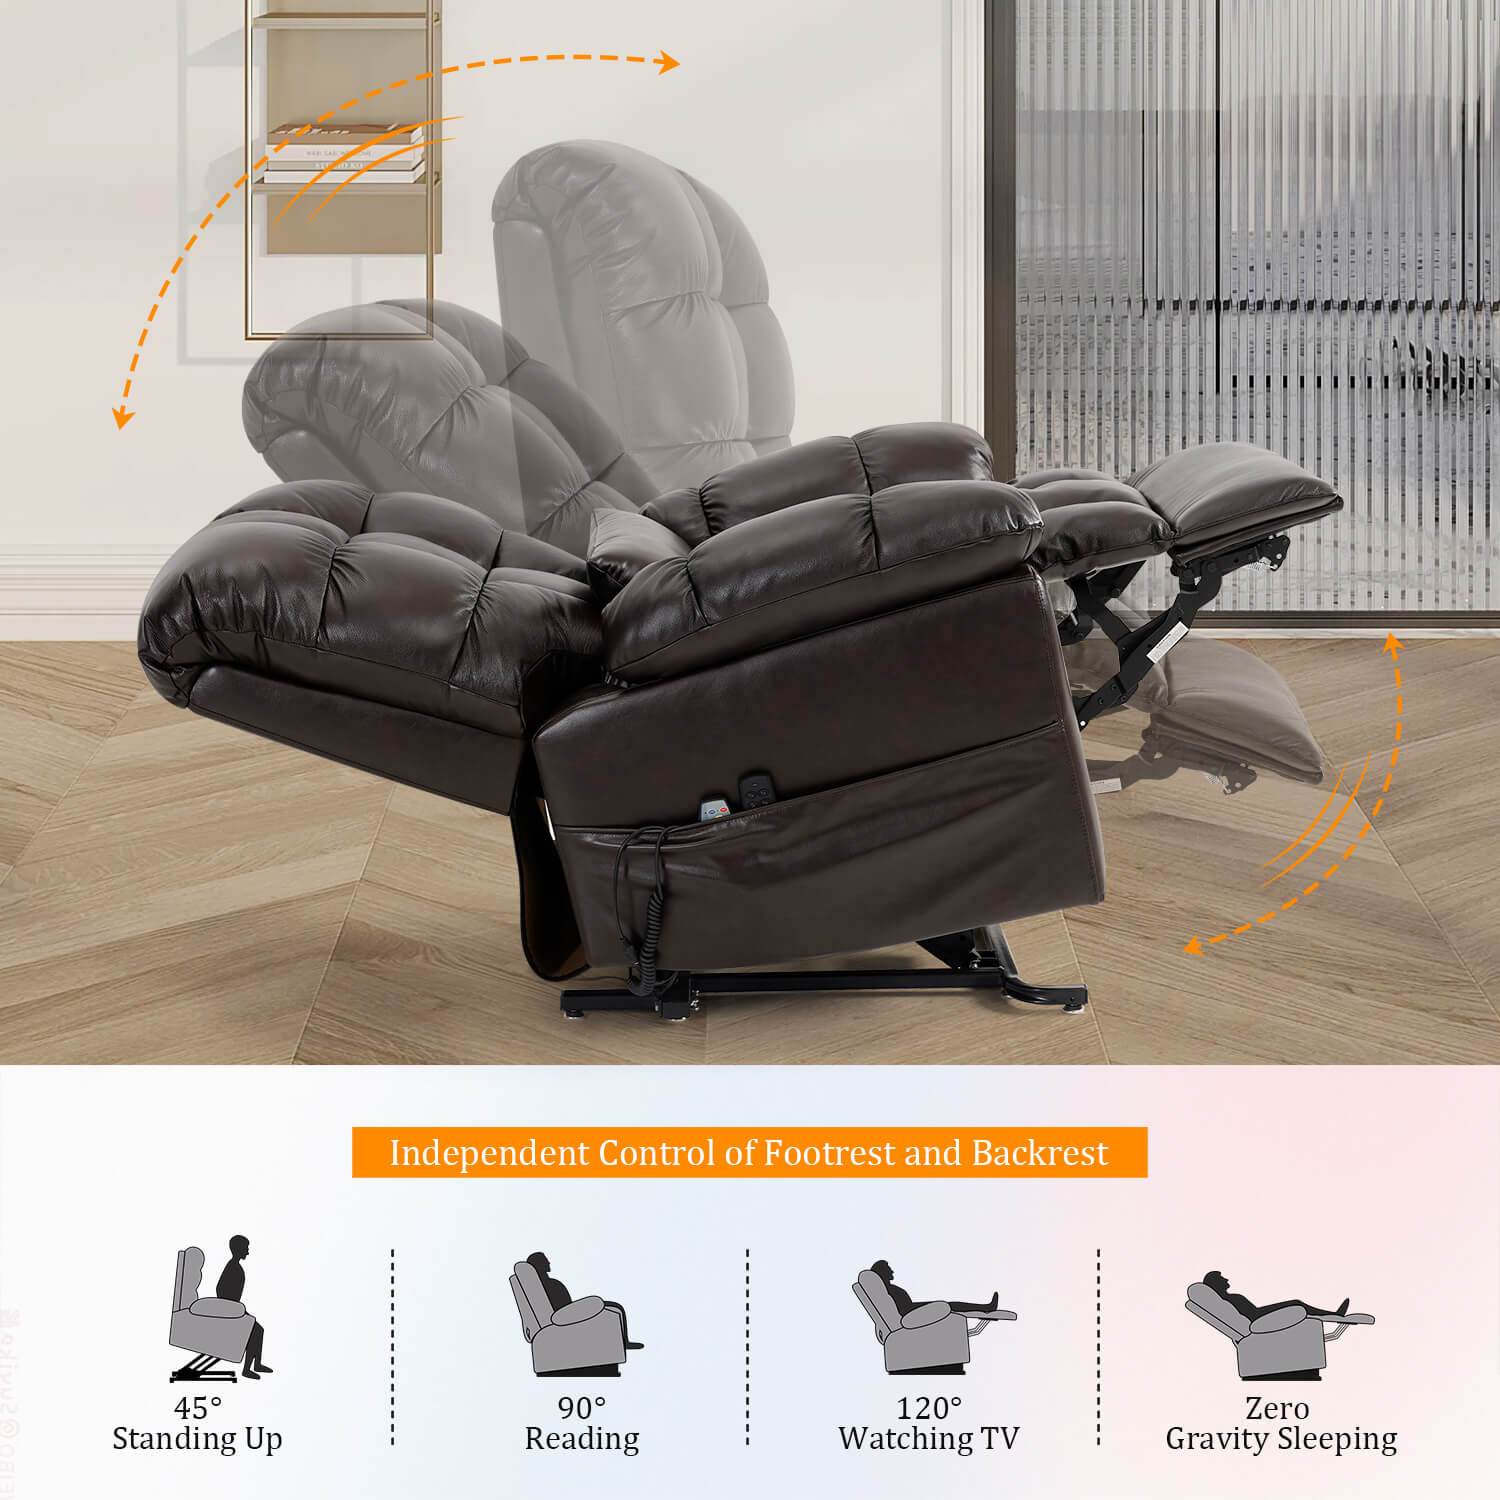 Soulout Three Motor Zero Gravity Lift Recliner Chair Infinite Position